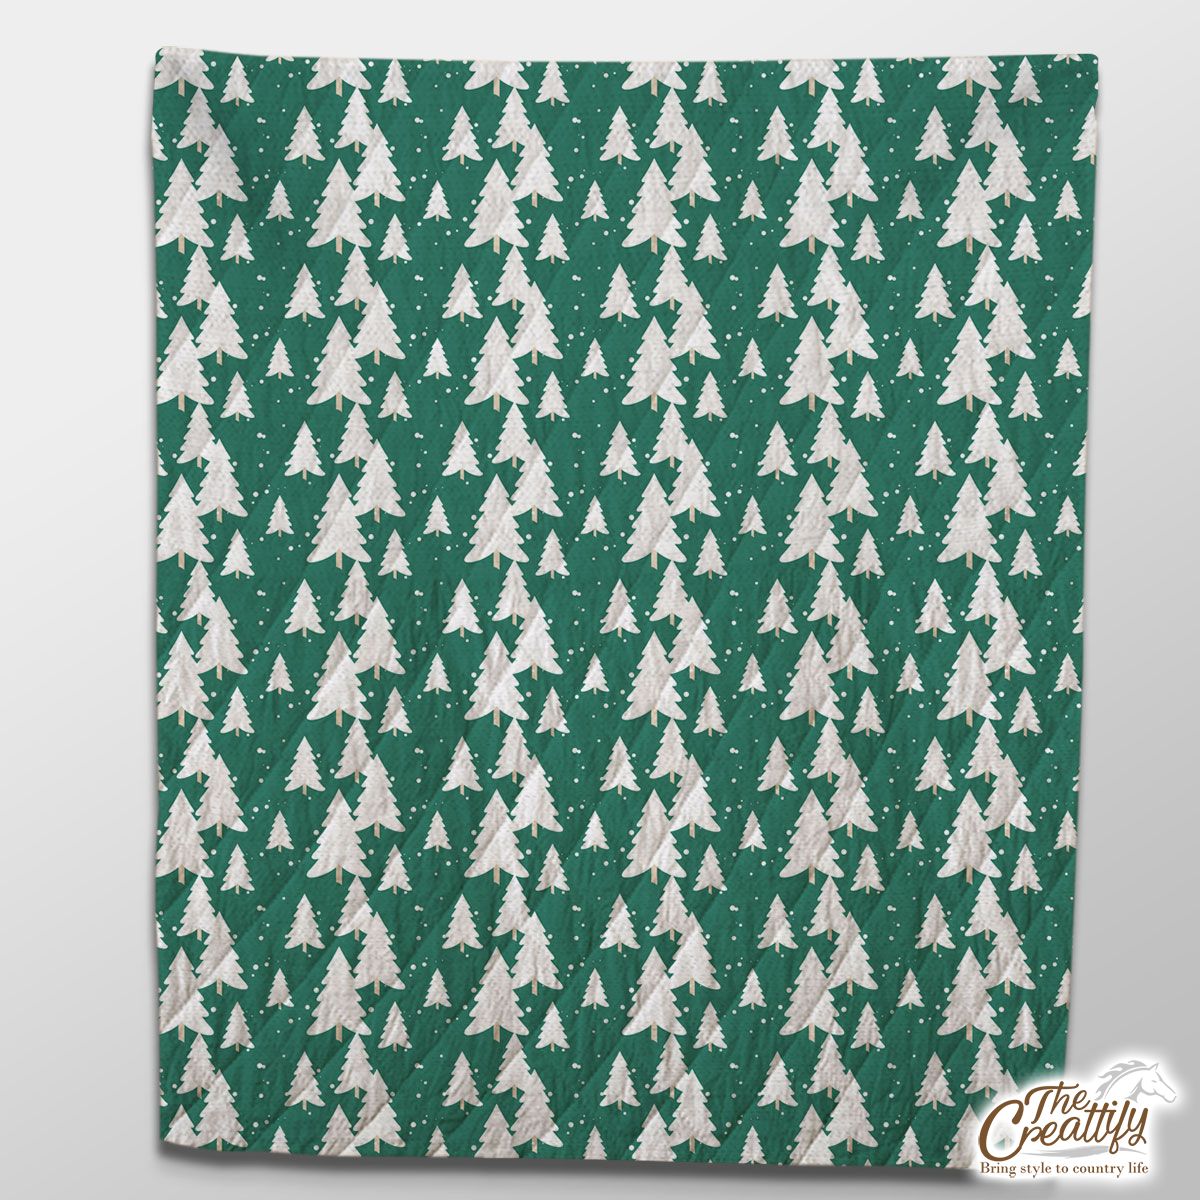 Green And White Christmas Tree Quilt